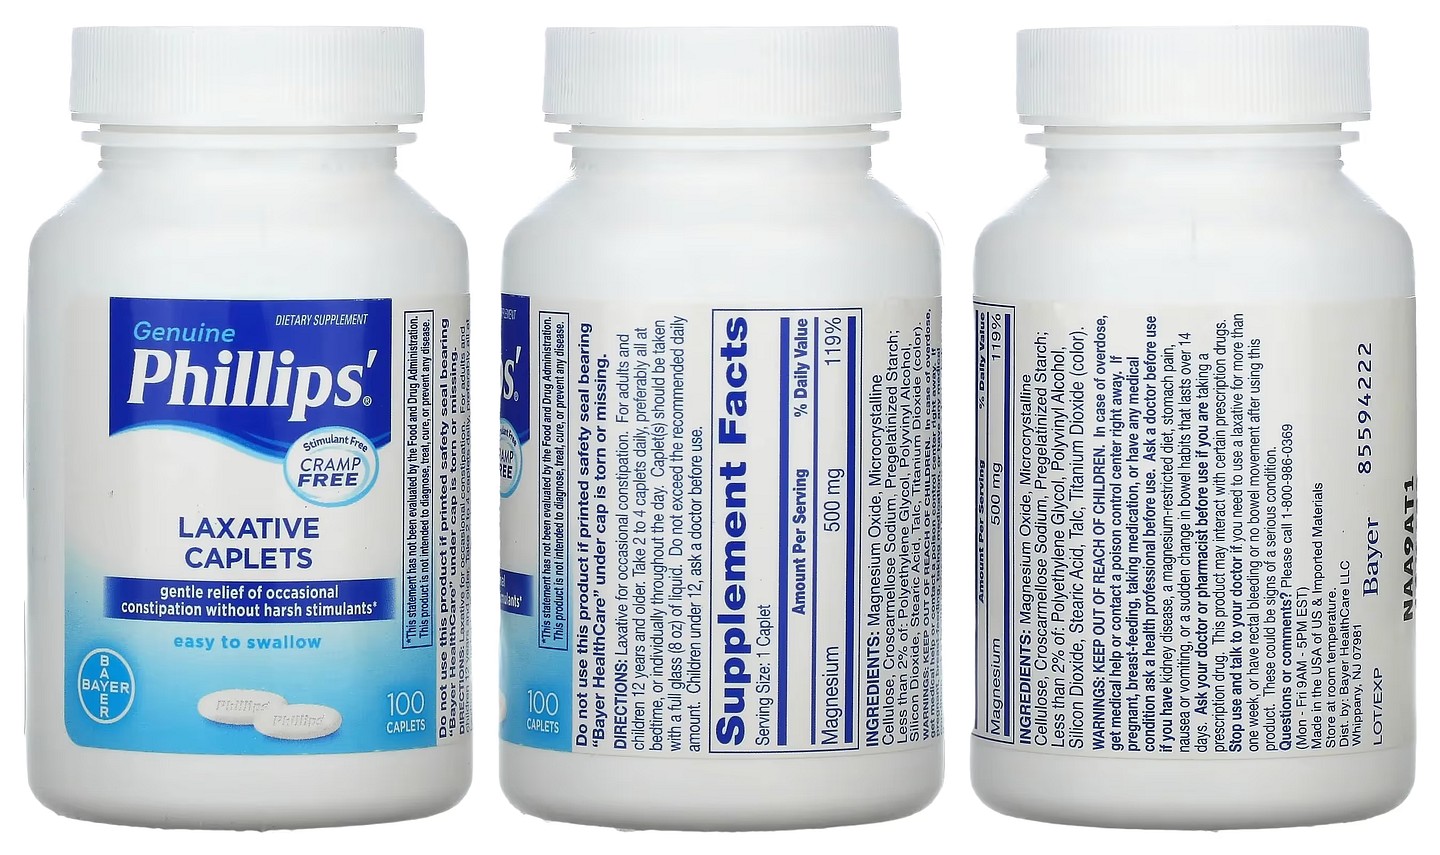 Phillips, Laxative Caplets packaging